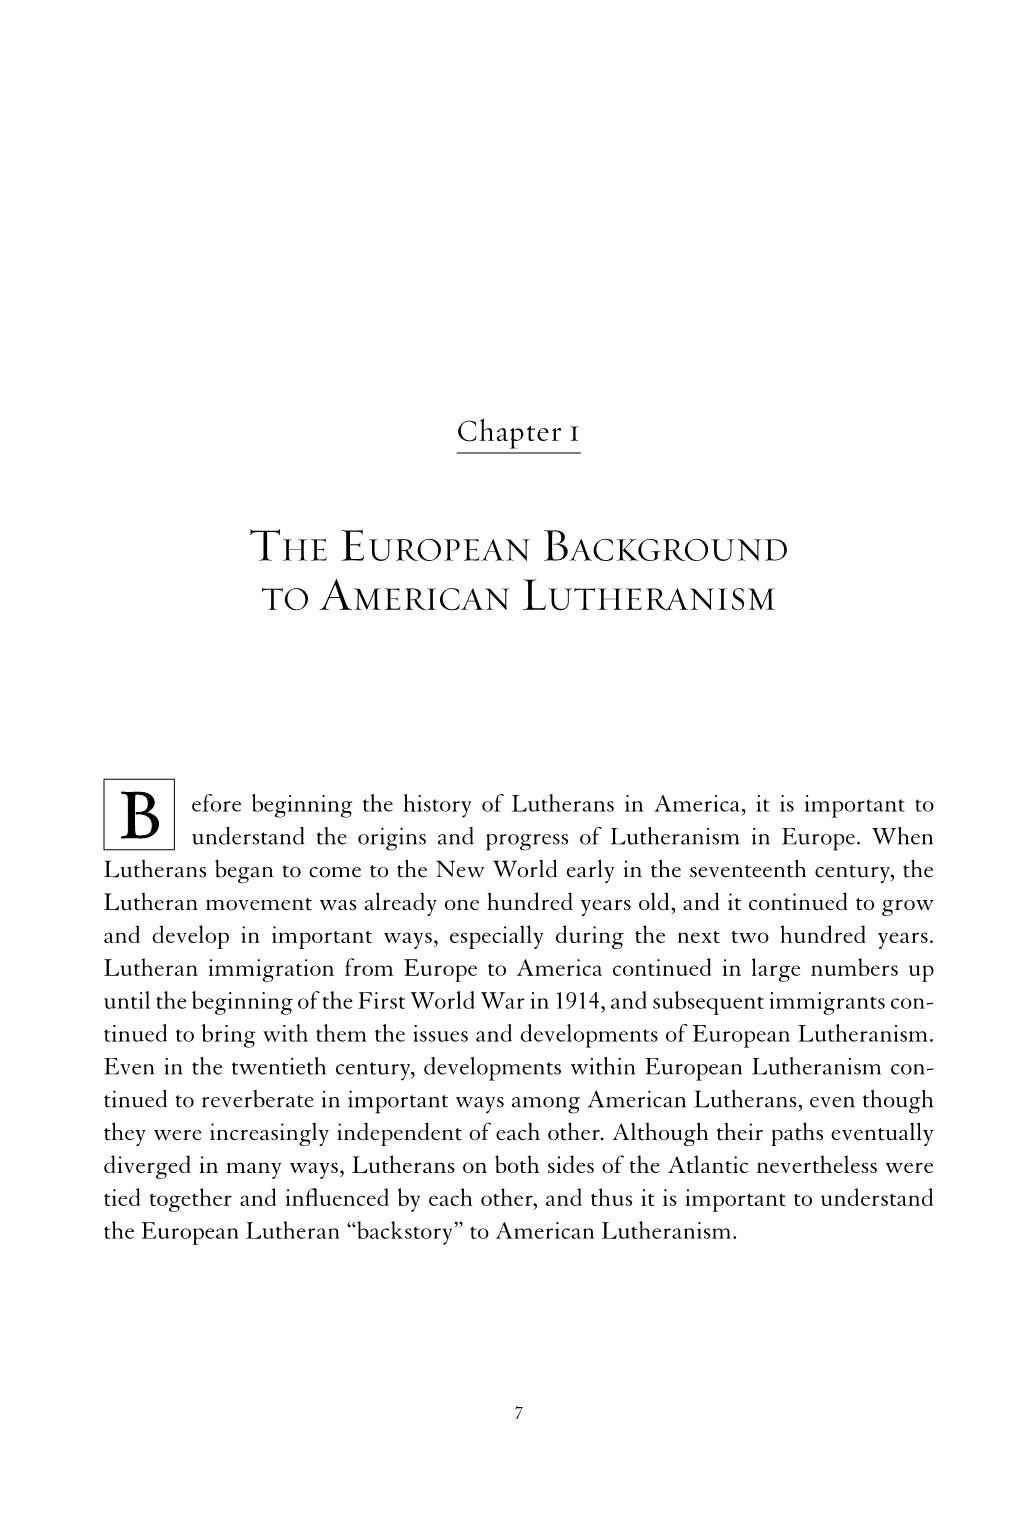 The European Background to American Lutheranism